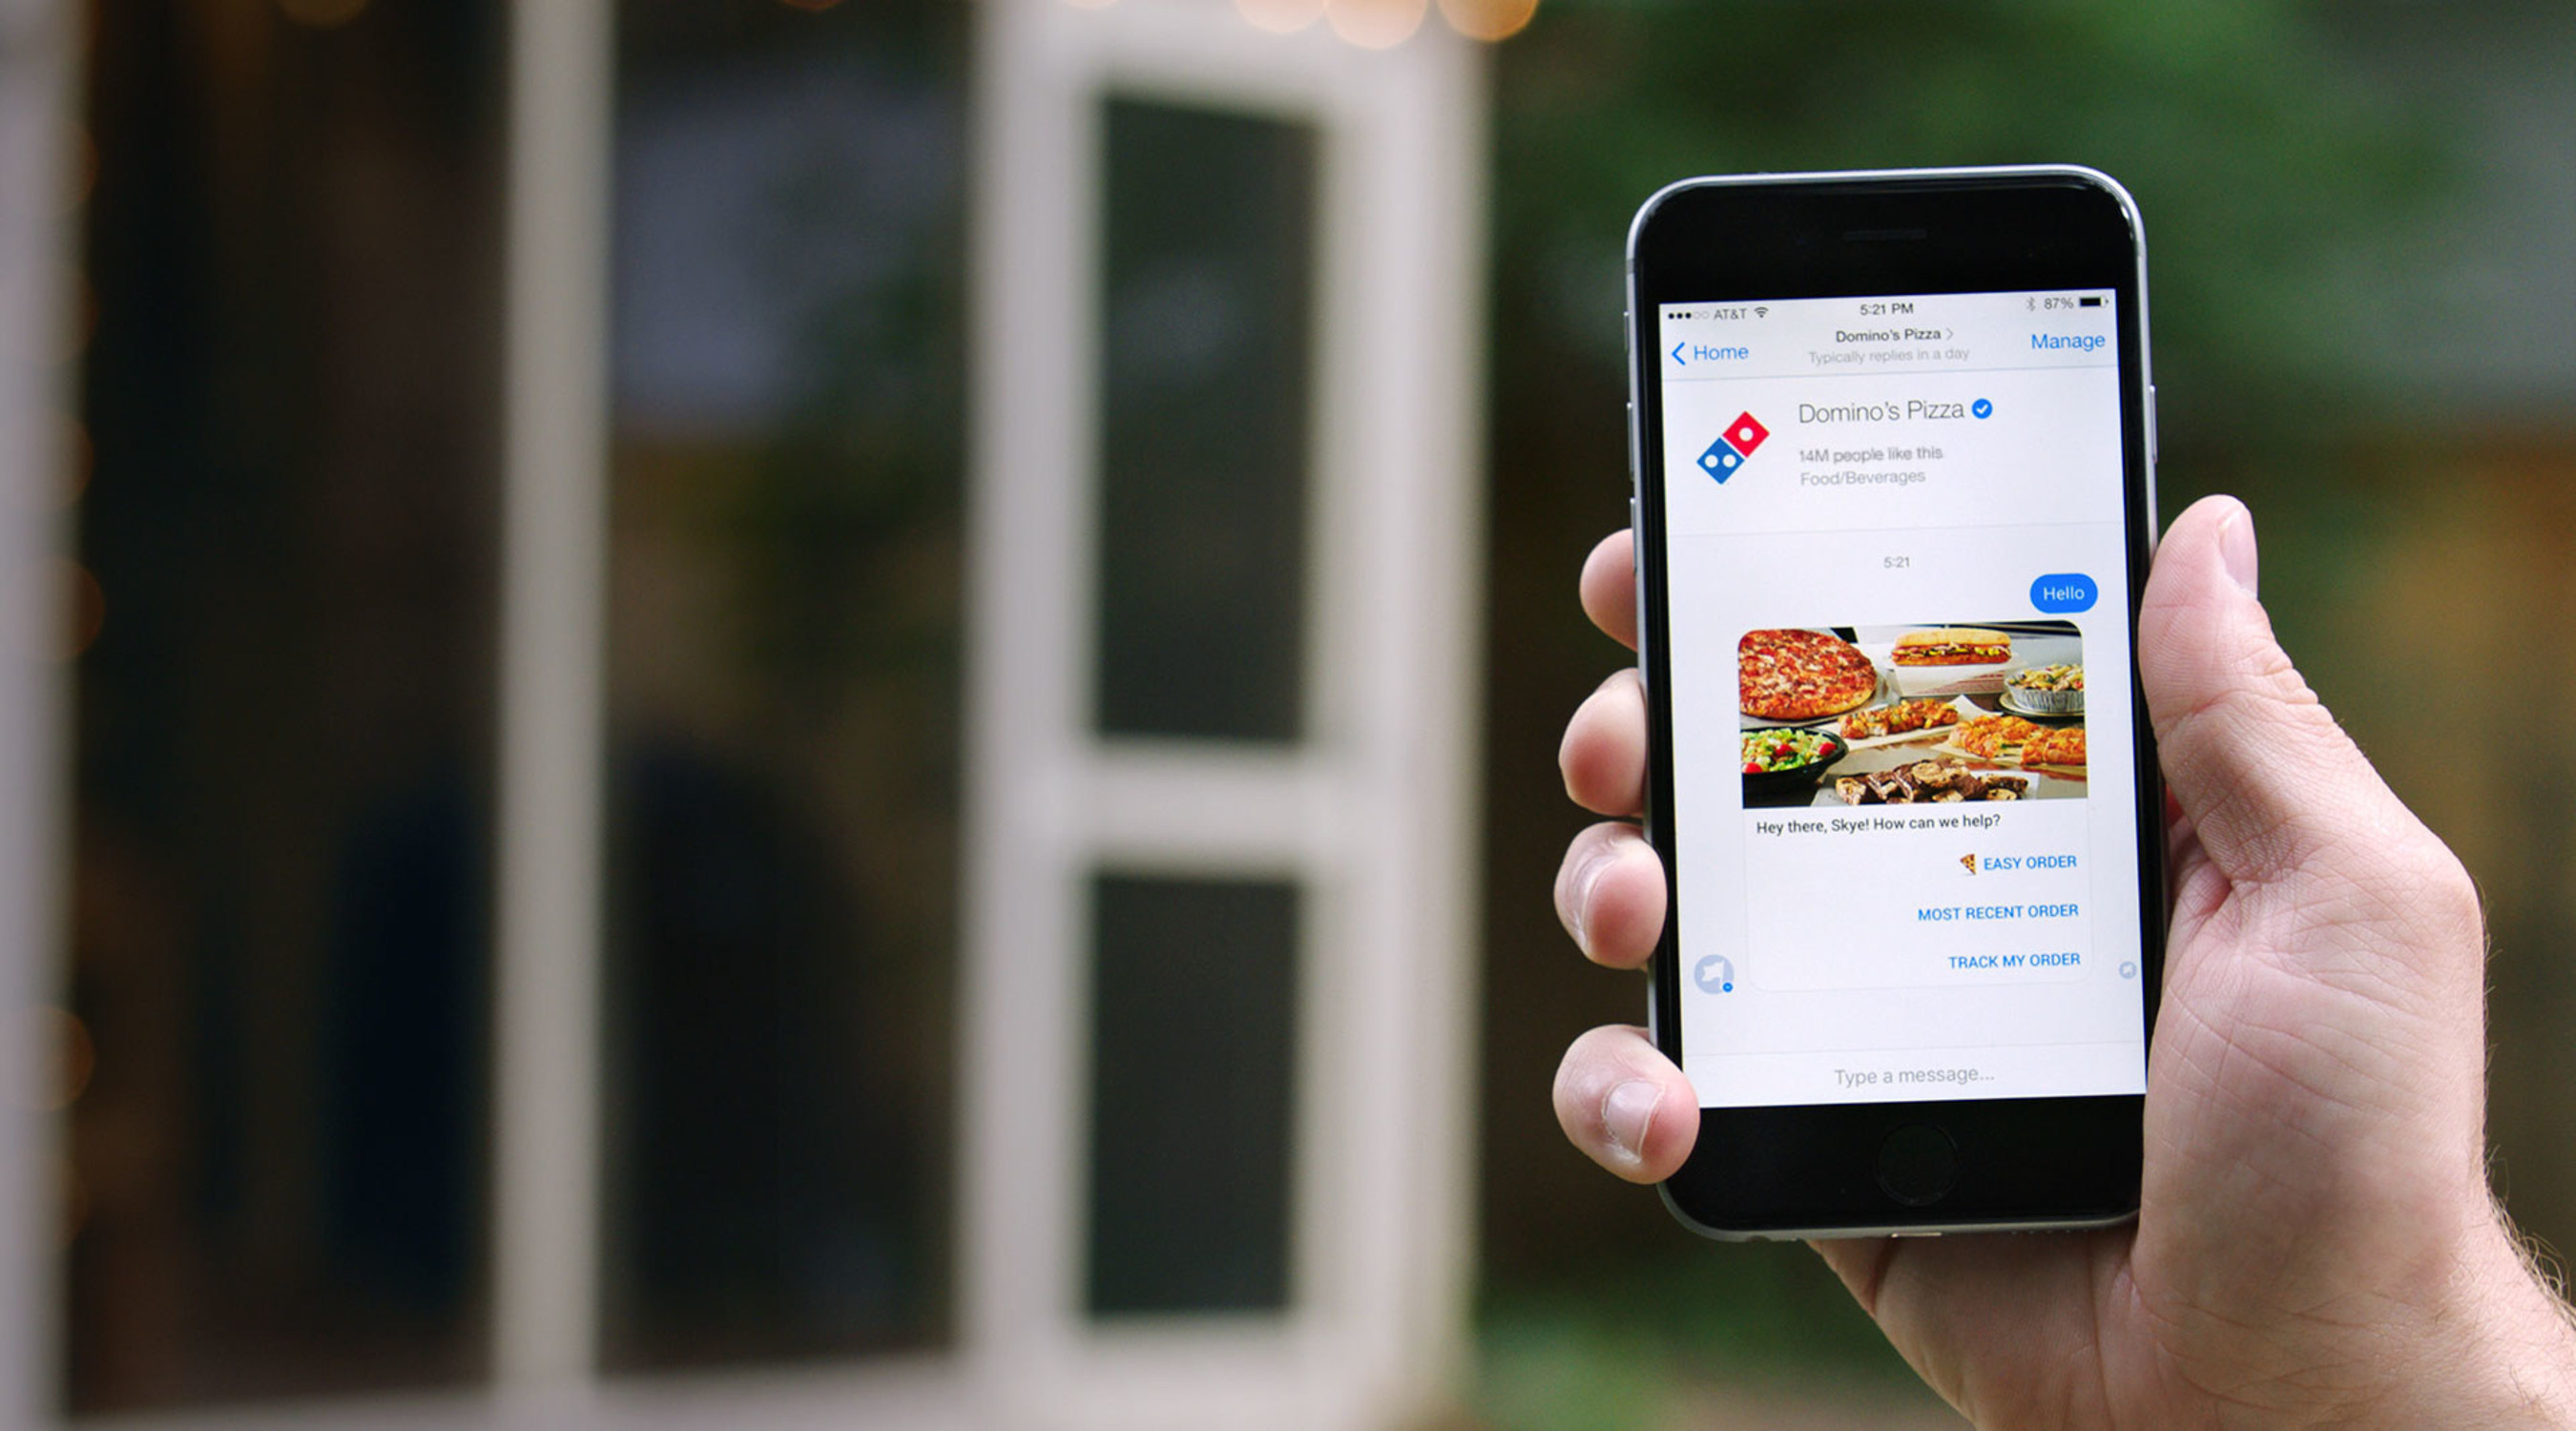 Domino's is giving customers yet another way to order: via Facebook Messenger, using bot technology.